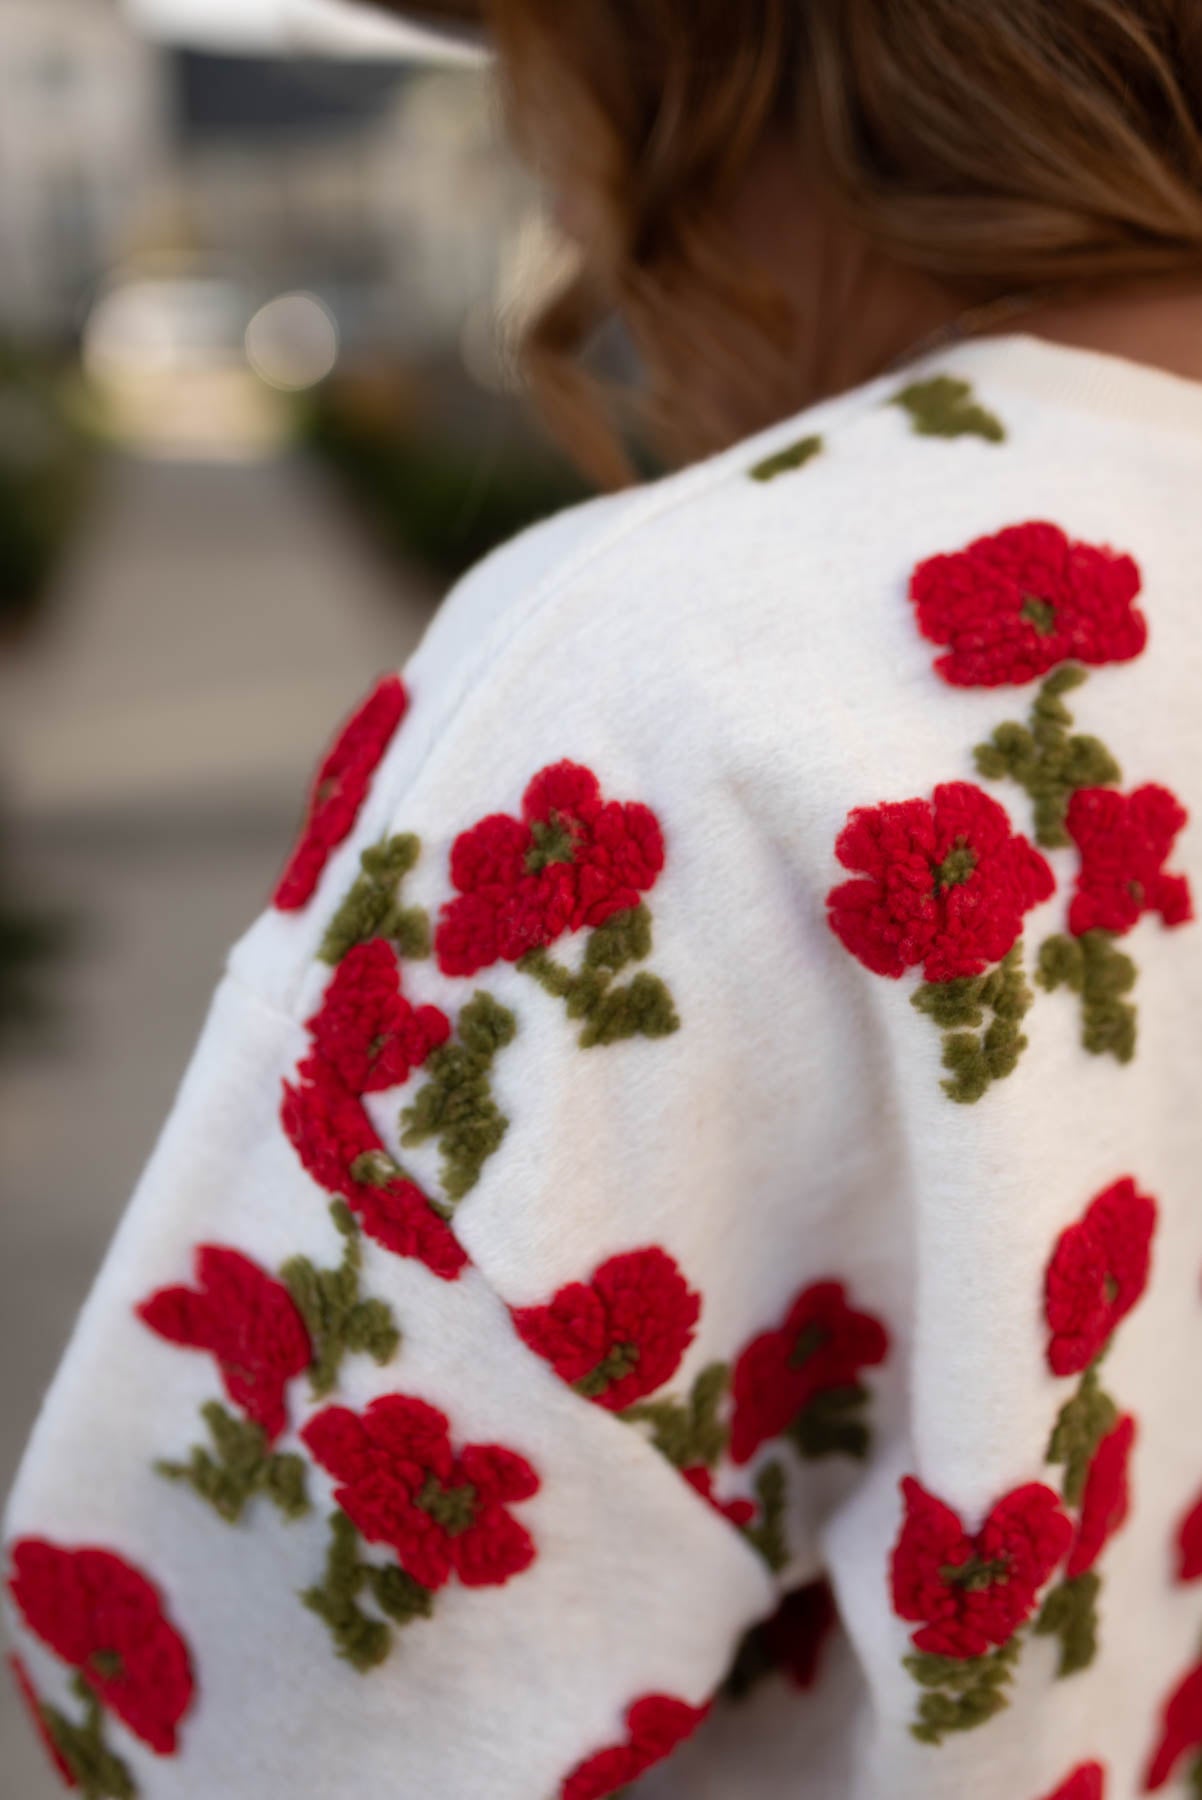 Close up view of the fleece flowered sweater